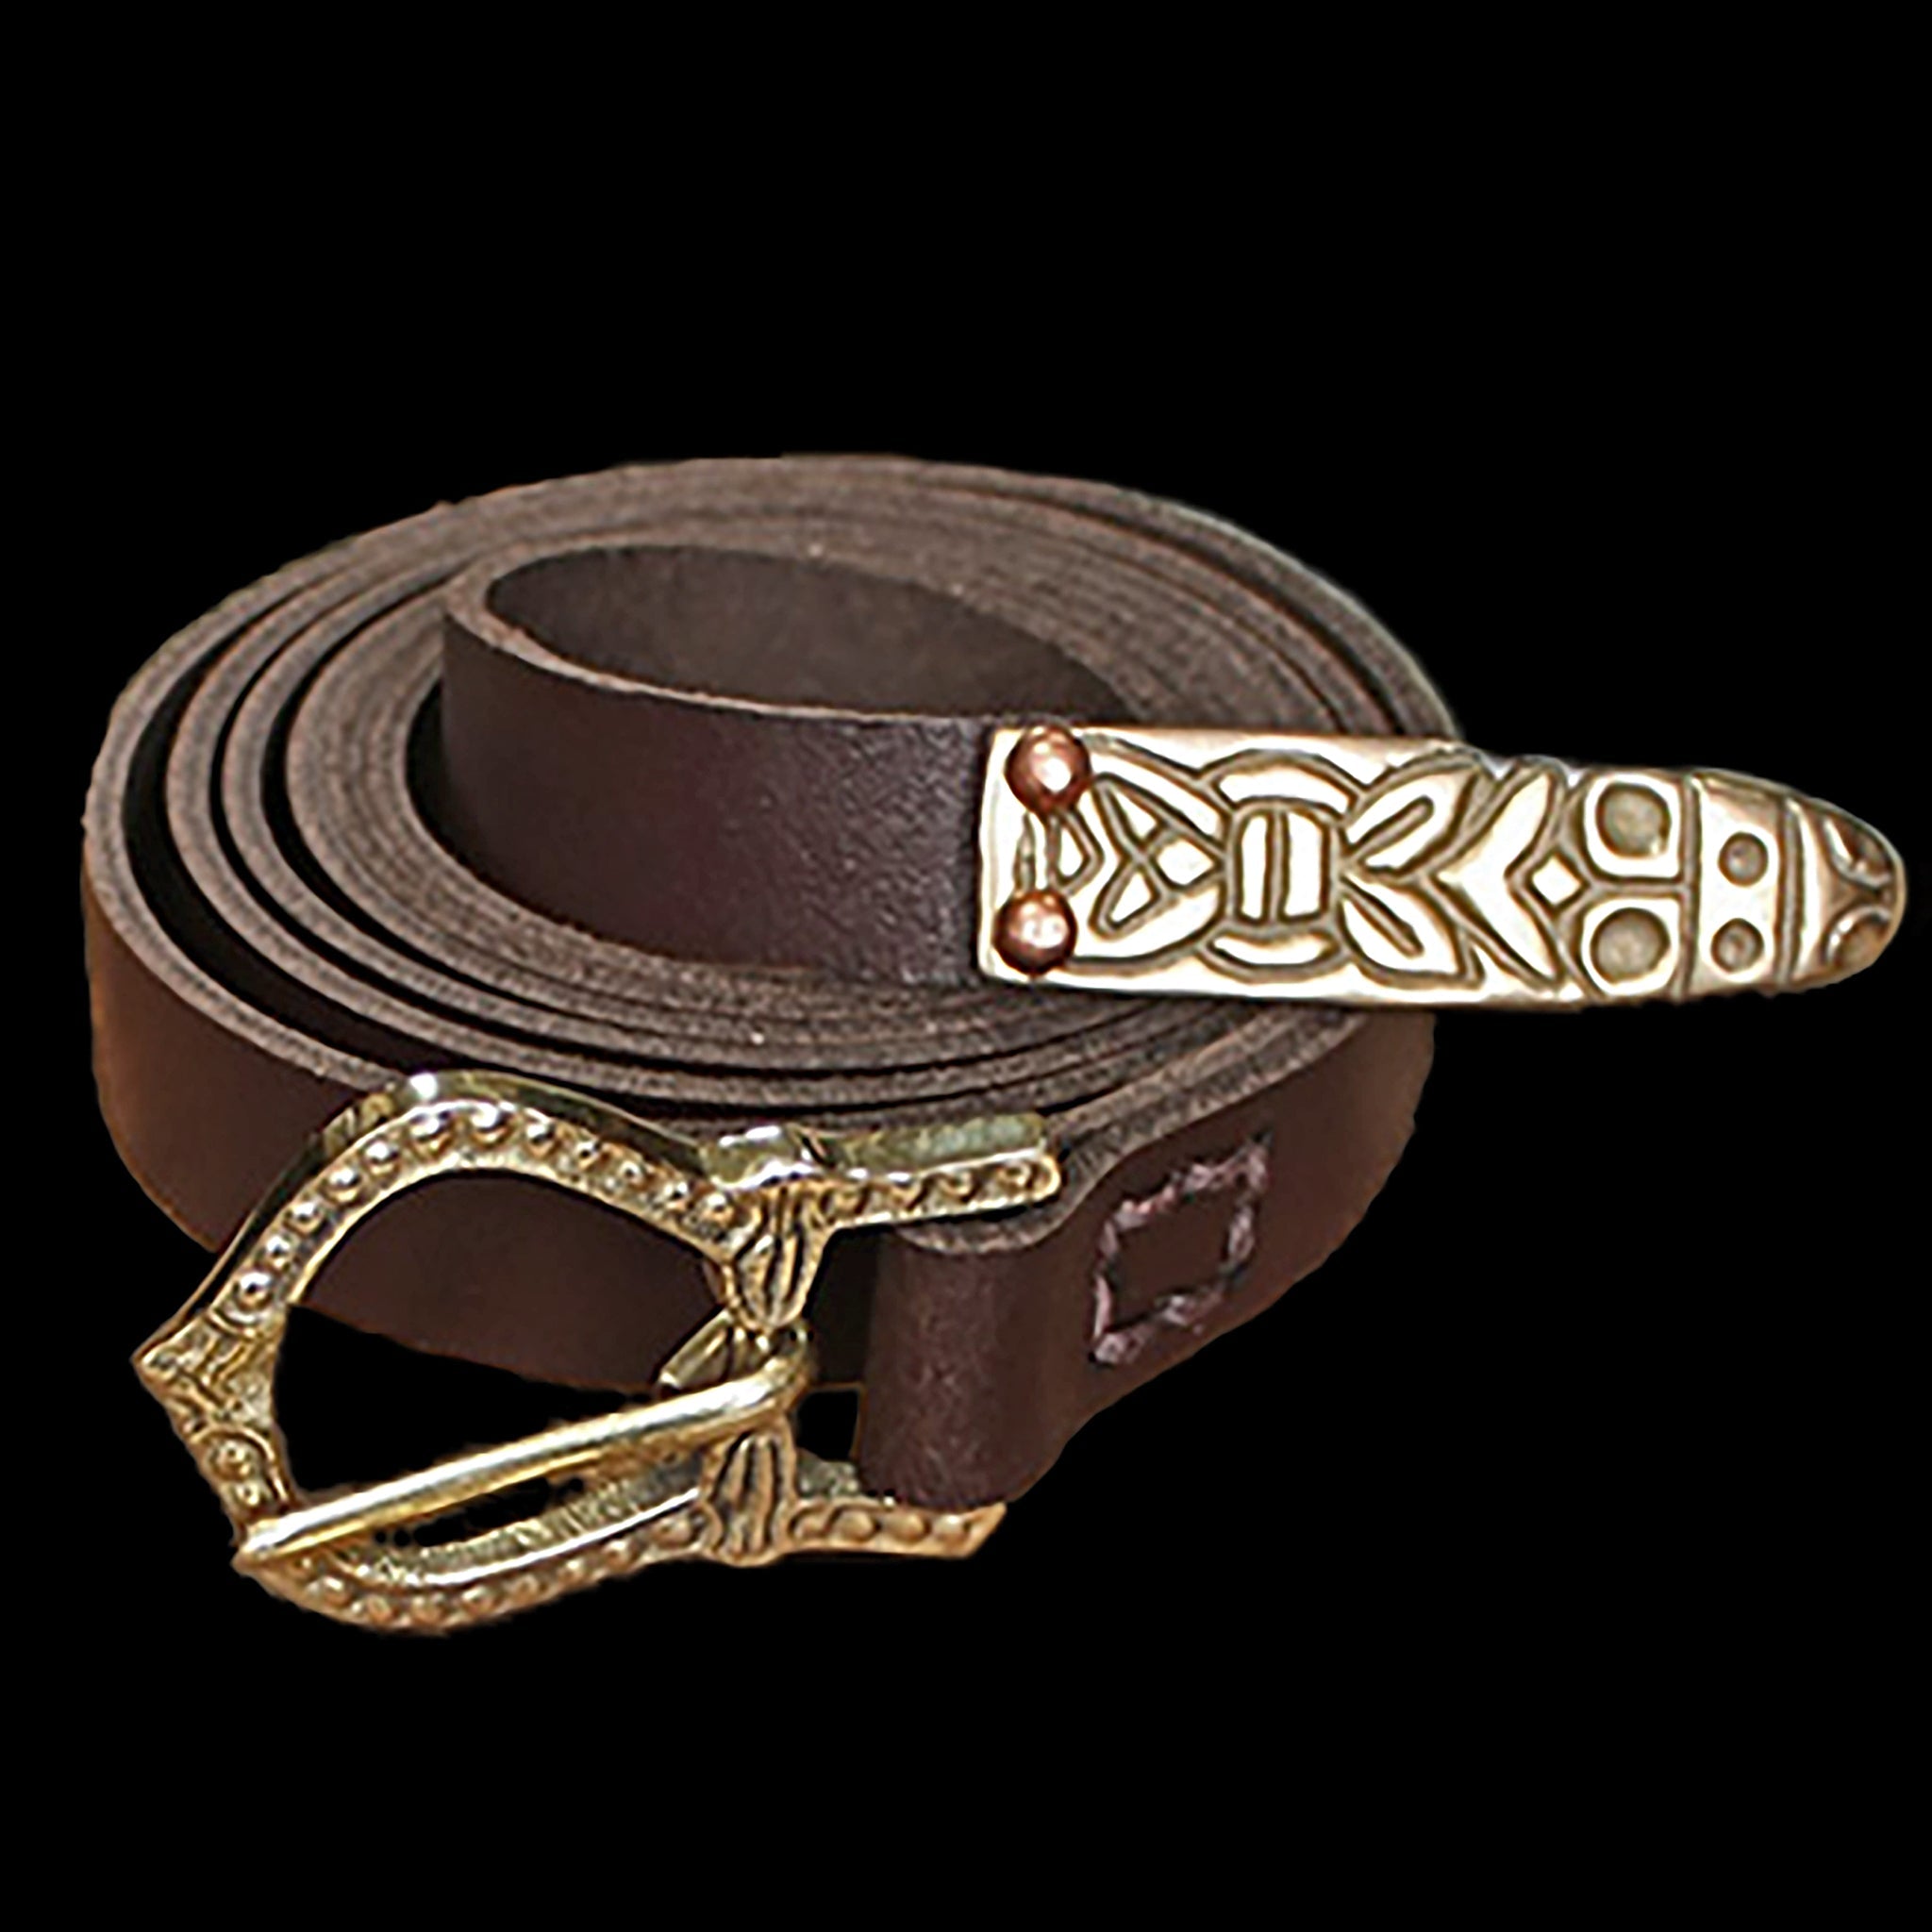 19mm Wide Bronw Leather Viking Belt with Bronze Rus Viking Buckle and Bronze Animal Head Viking Strap End